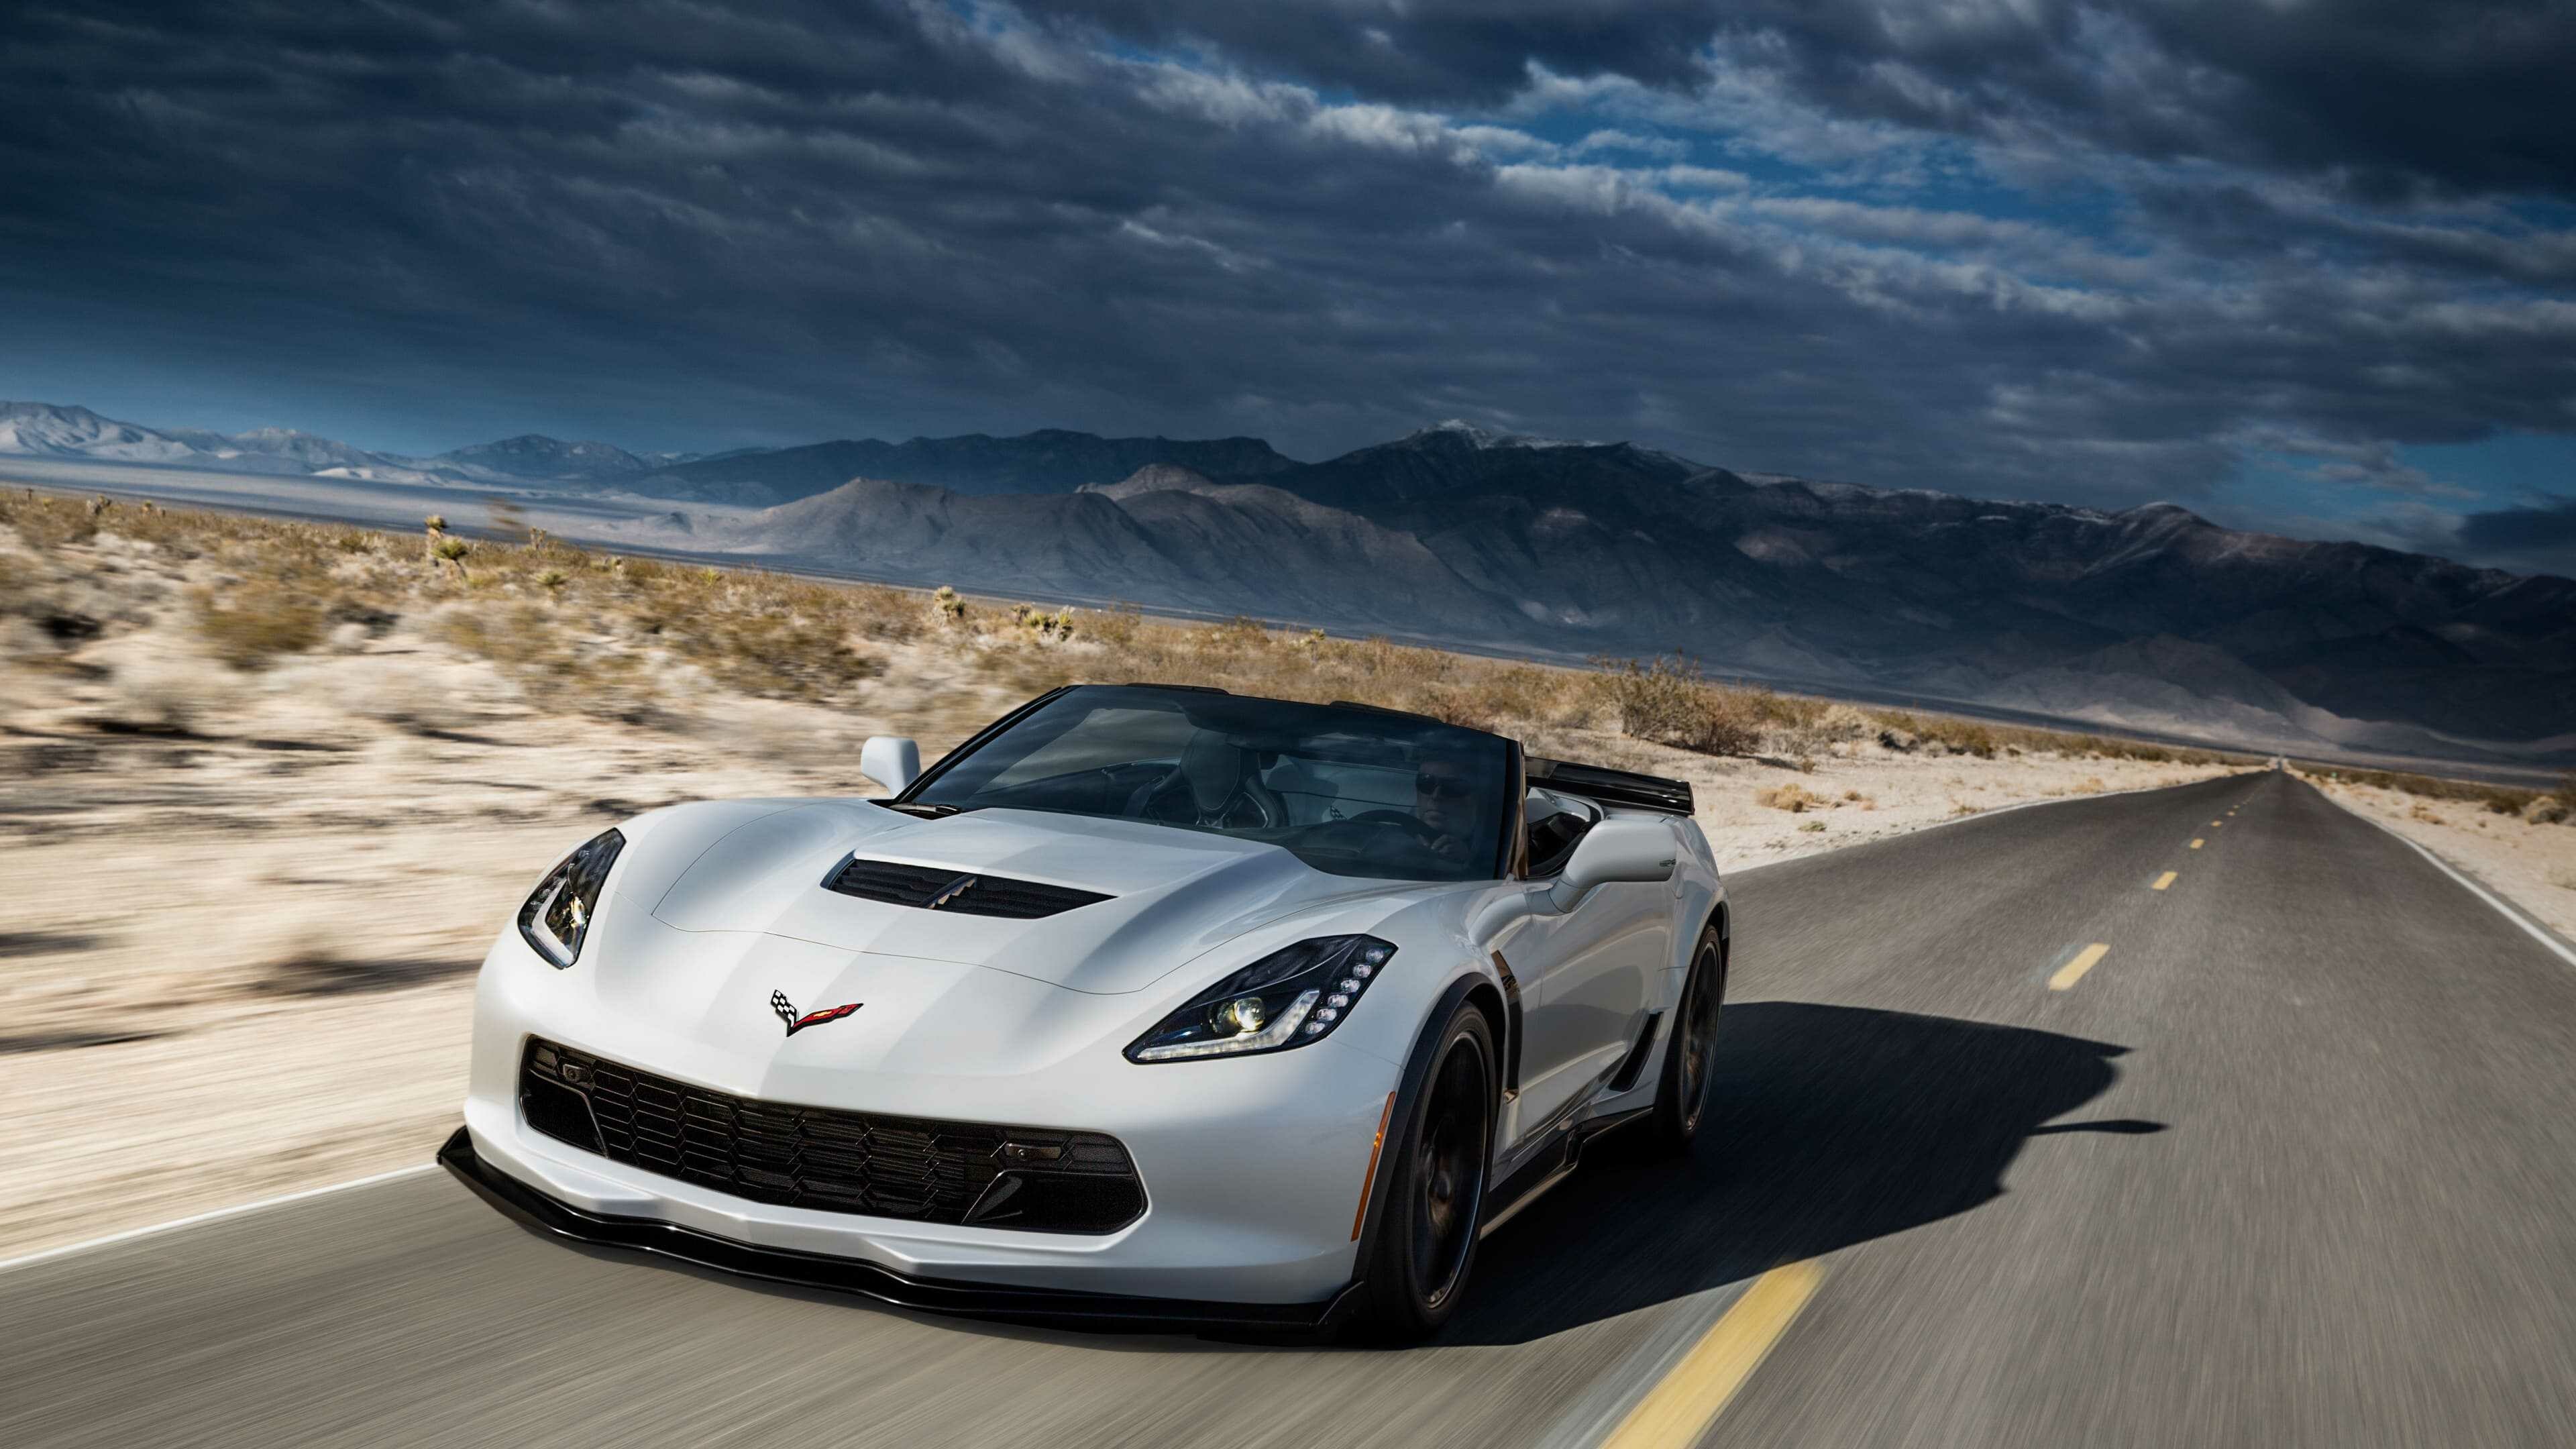 Chevrolet: The Corvette, one of the most famous sportscars in the world. 3840x2160 4K Background.